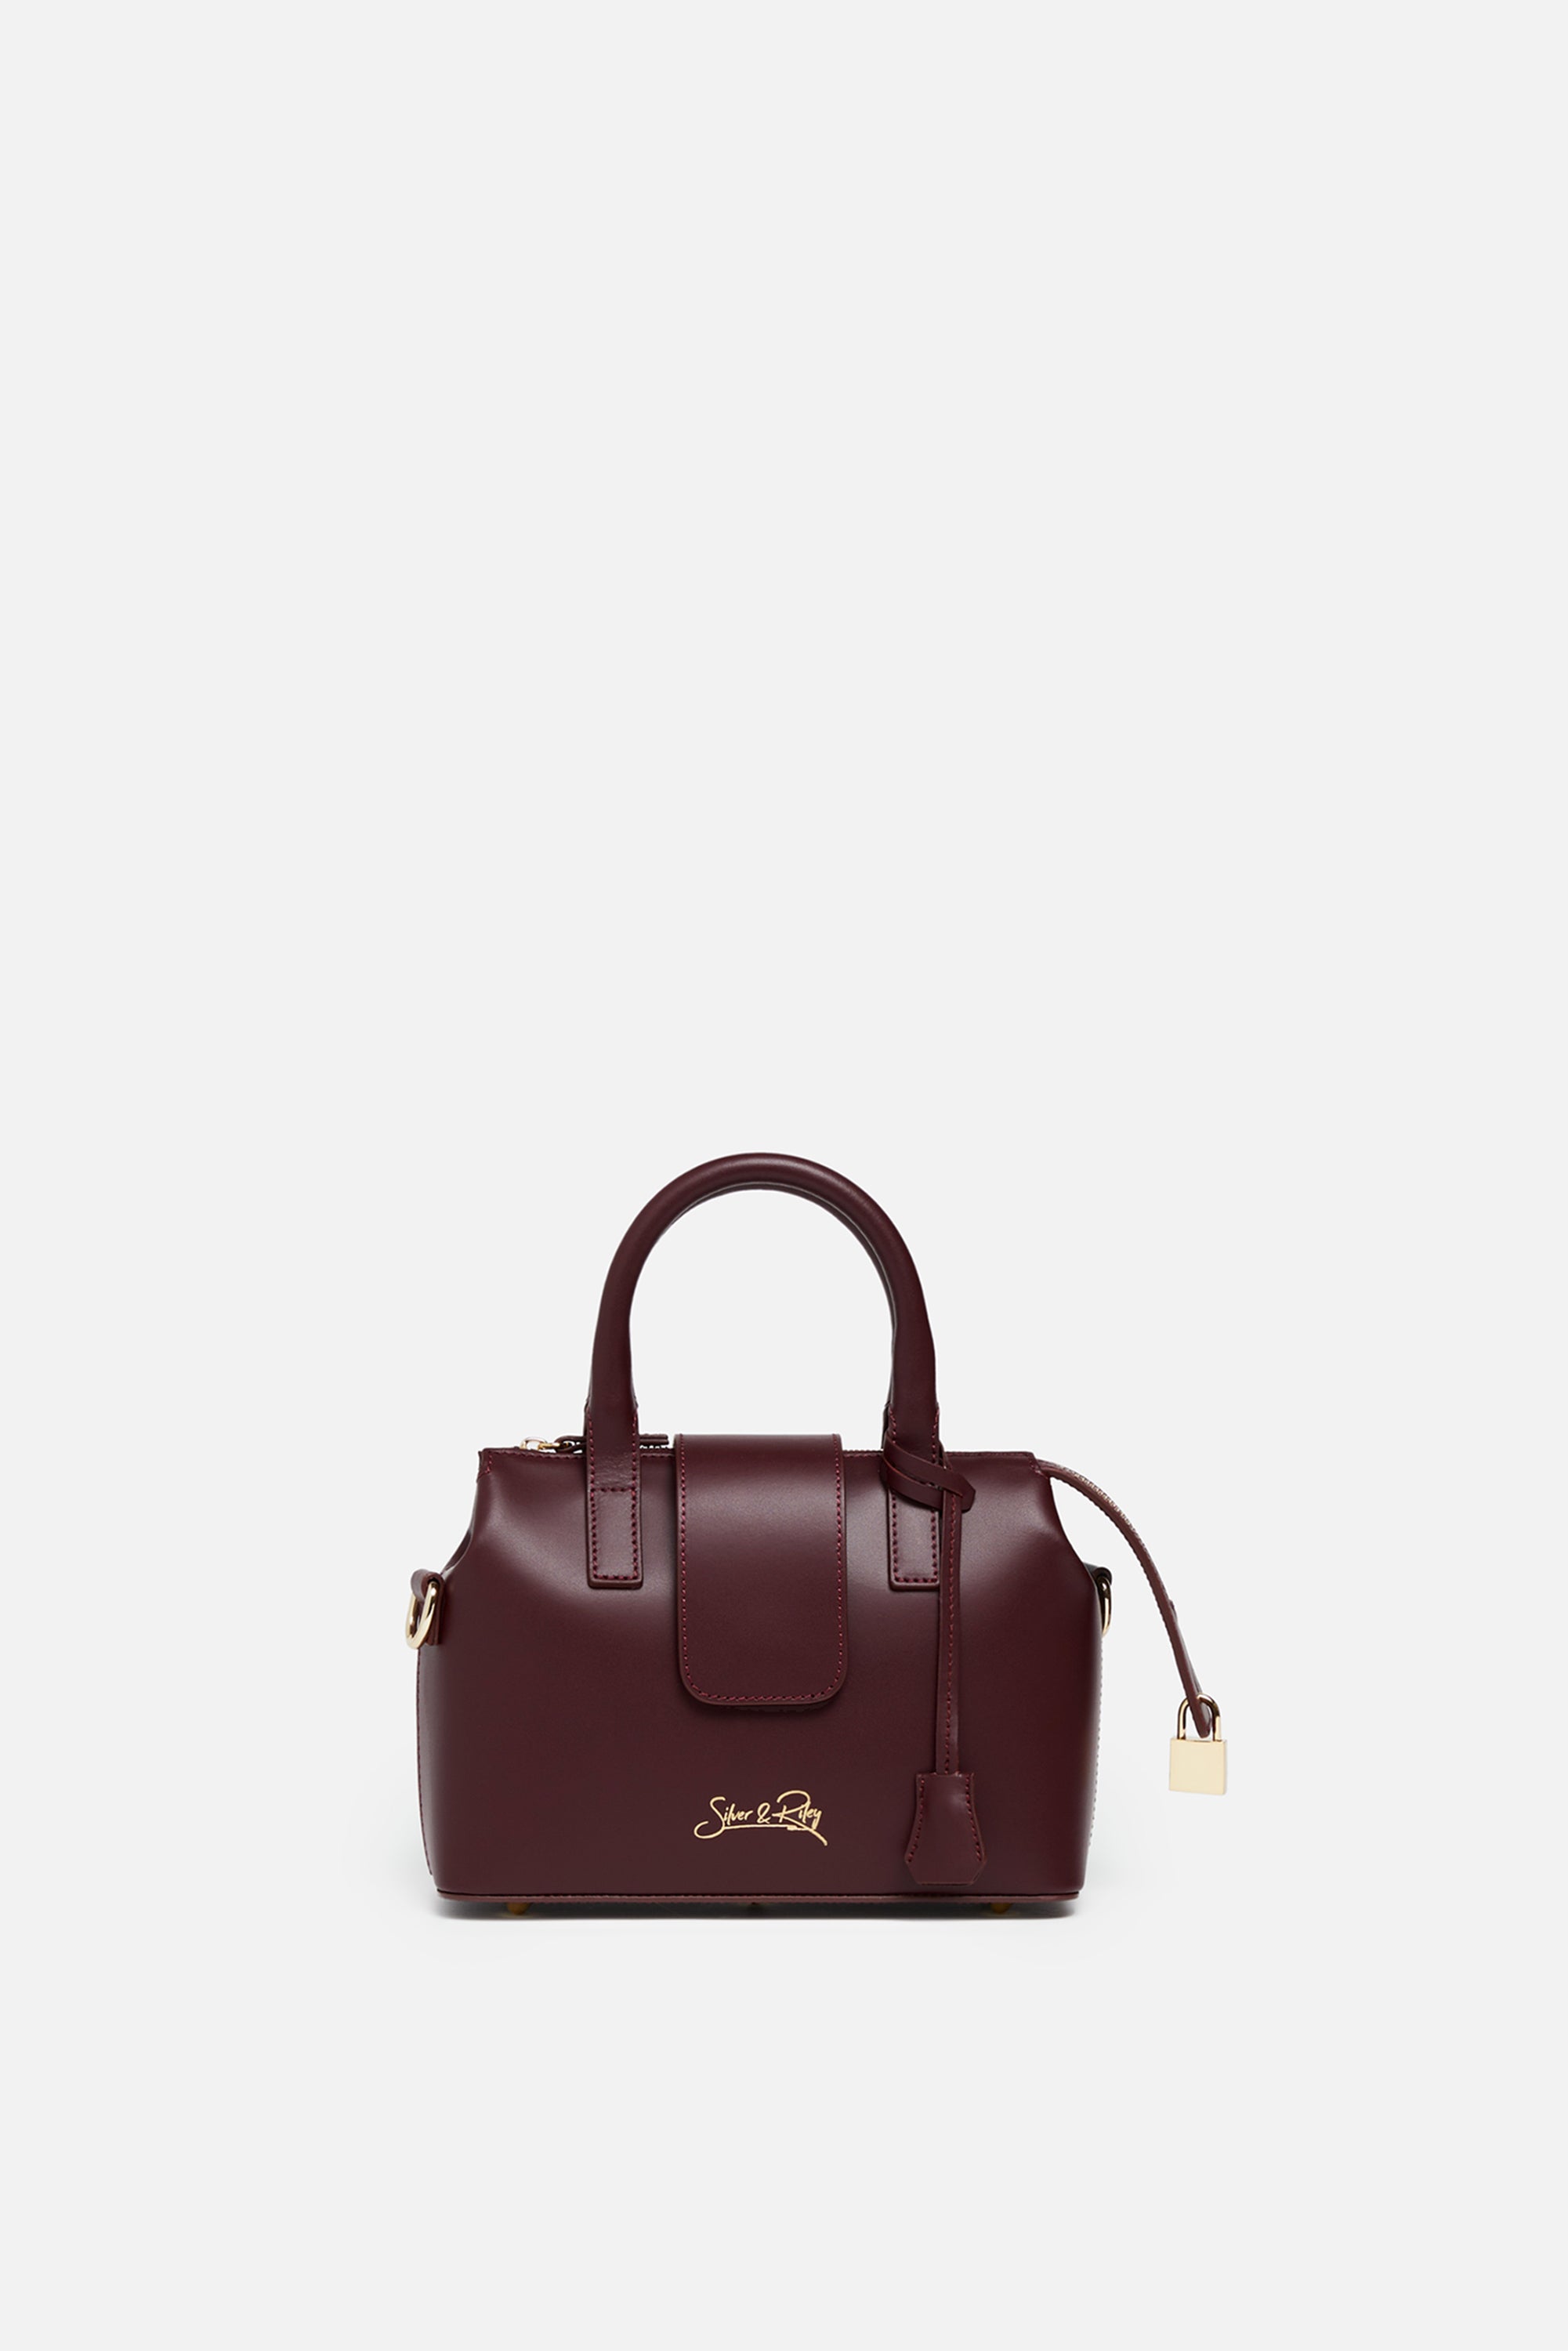 Guess LUXE fit the name such a luxurious bag.. everything about